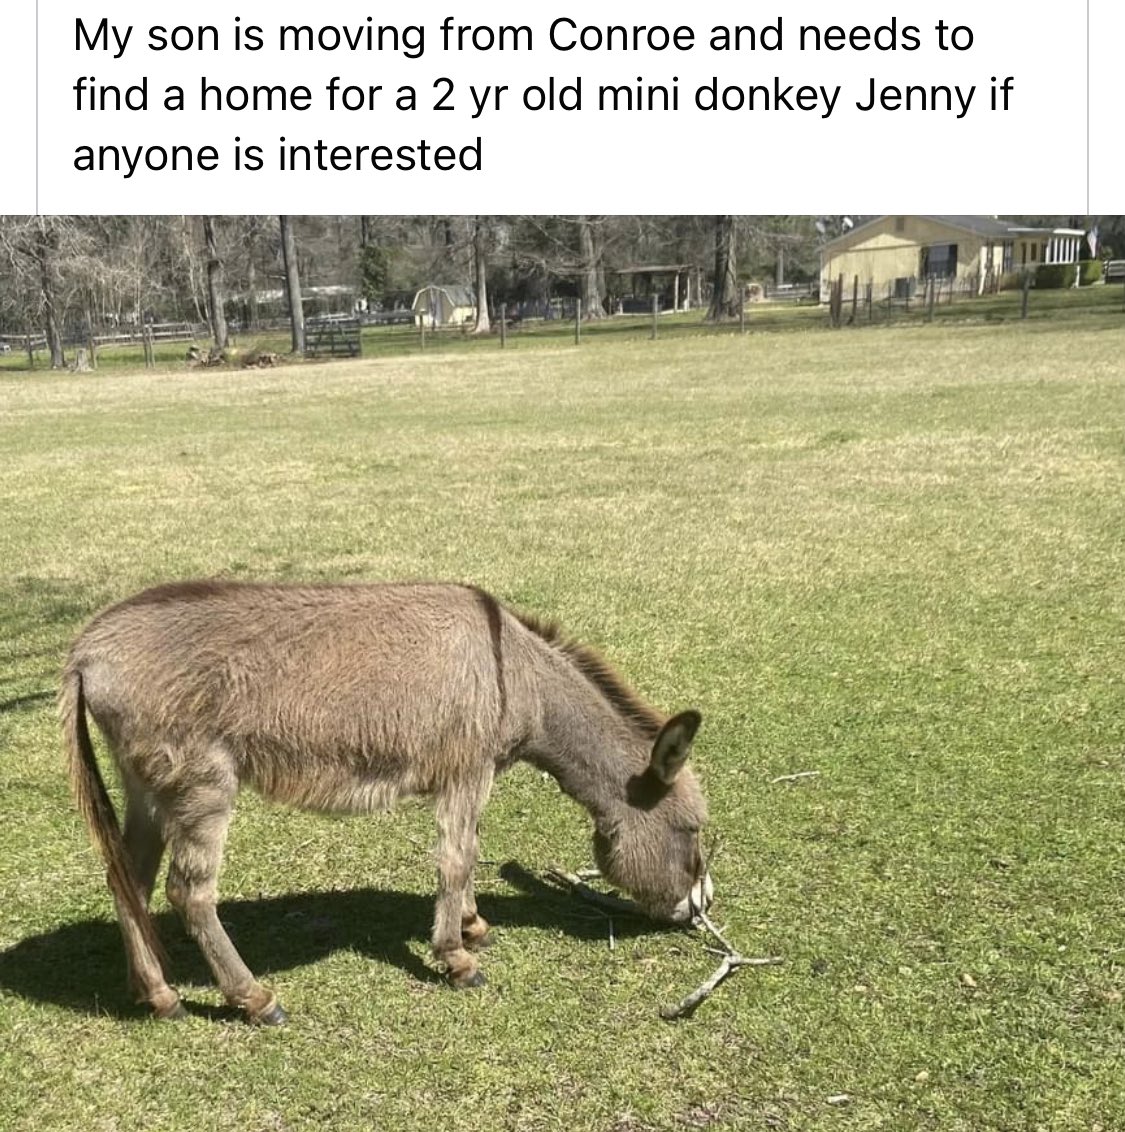 Don’t buy a mini donkey unless you’re going to be there for Jenny’s ENTIRE LIFE. Geez. https://t.co/3hlJoNXdXG